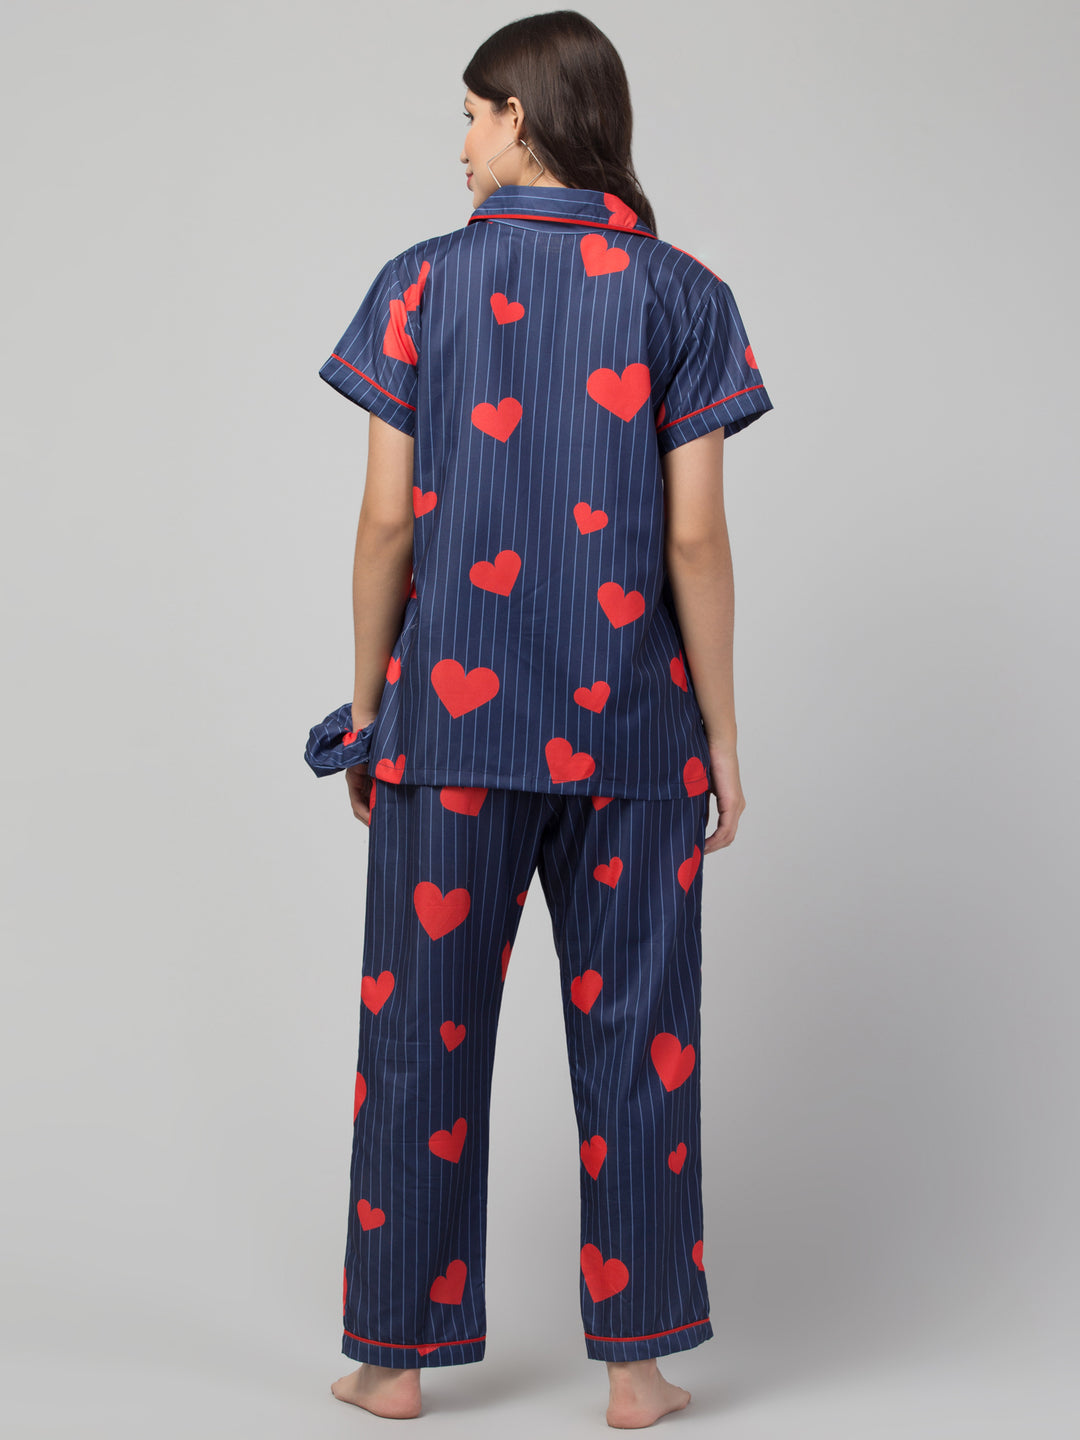 Red Heart Printed Set